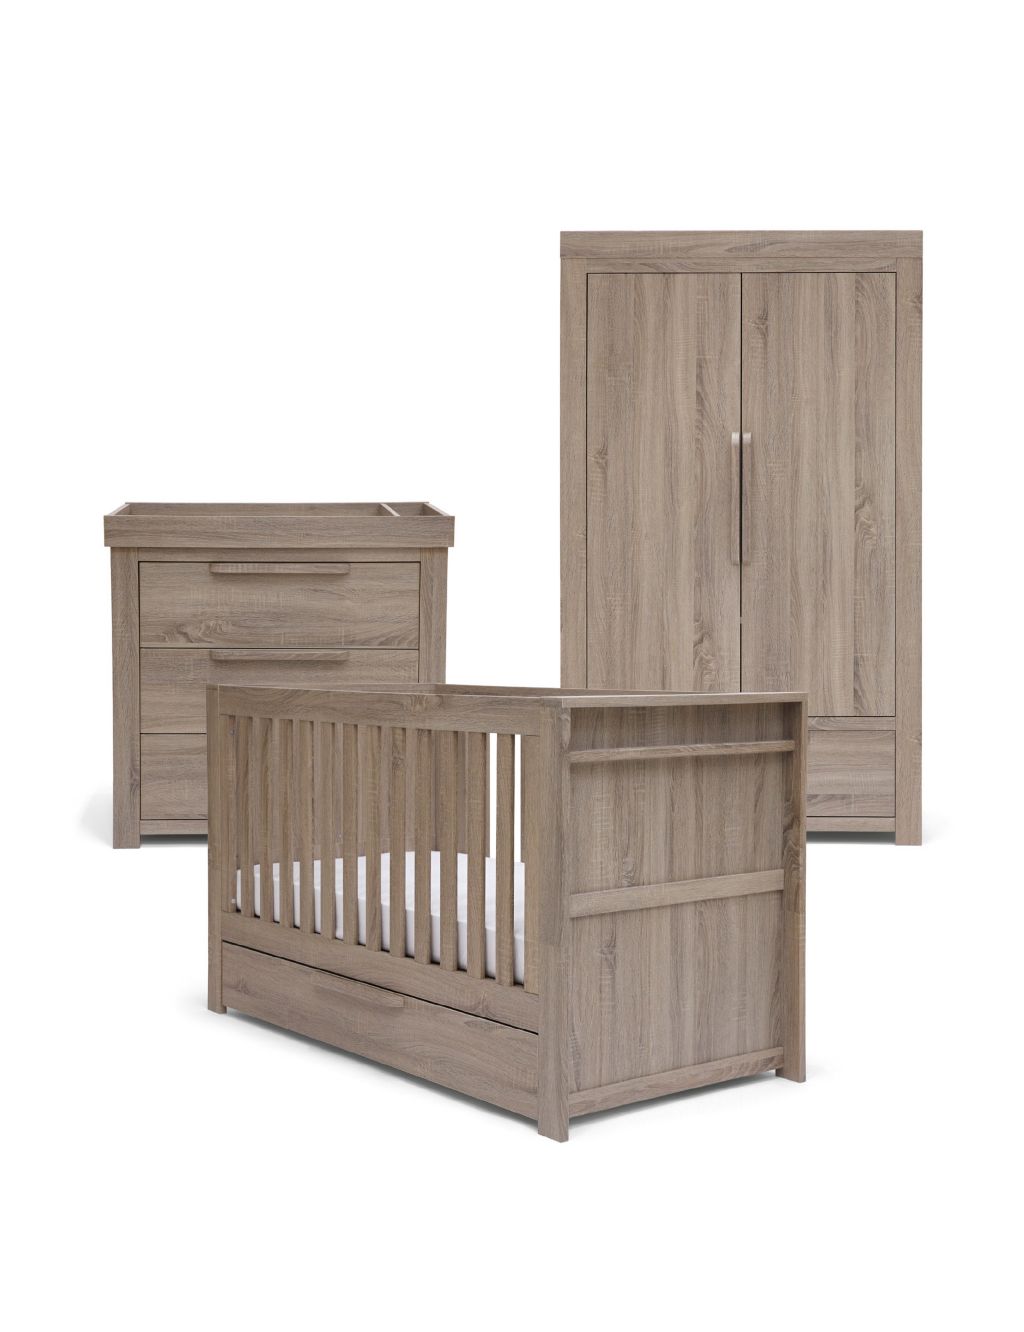 Franklin 3 Piece Cotbed Range with Dresser and Wardrobe